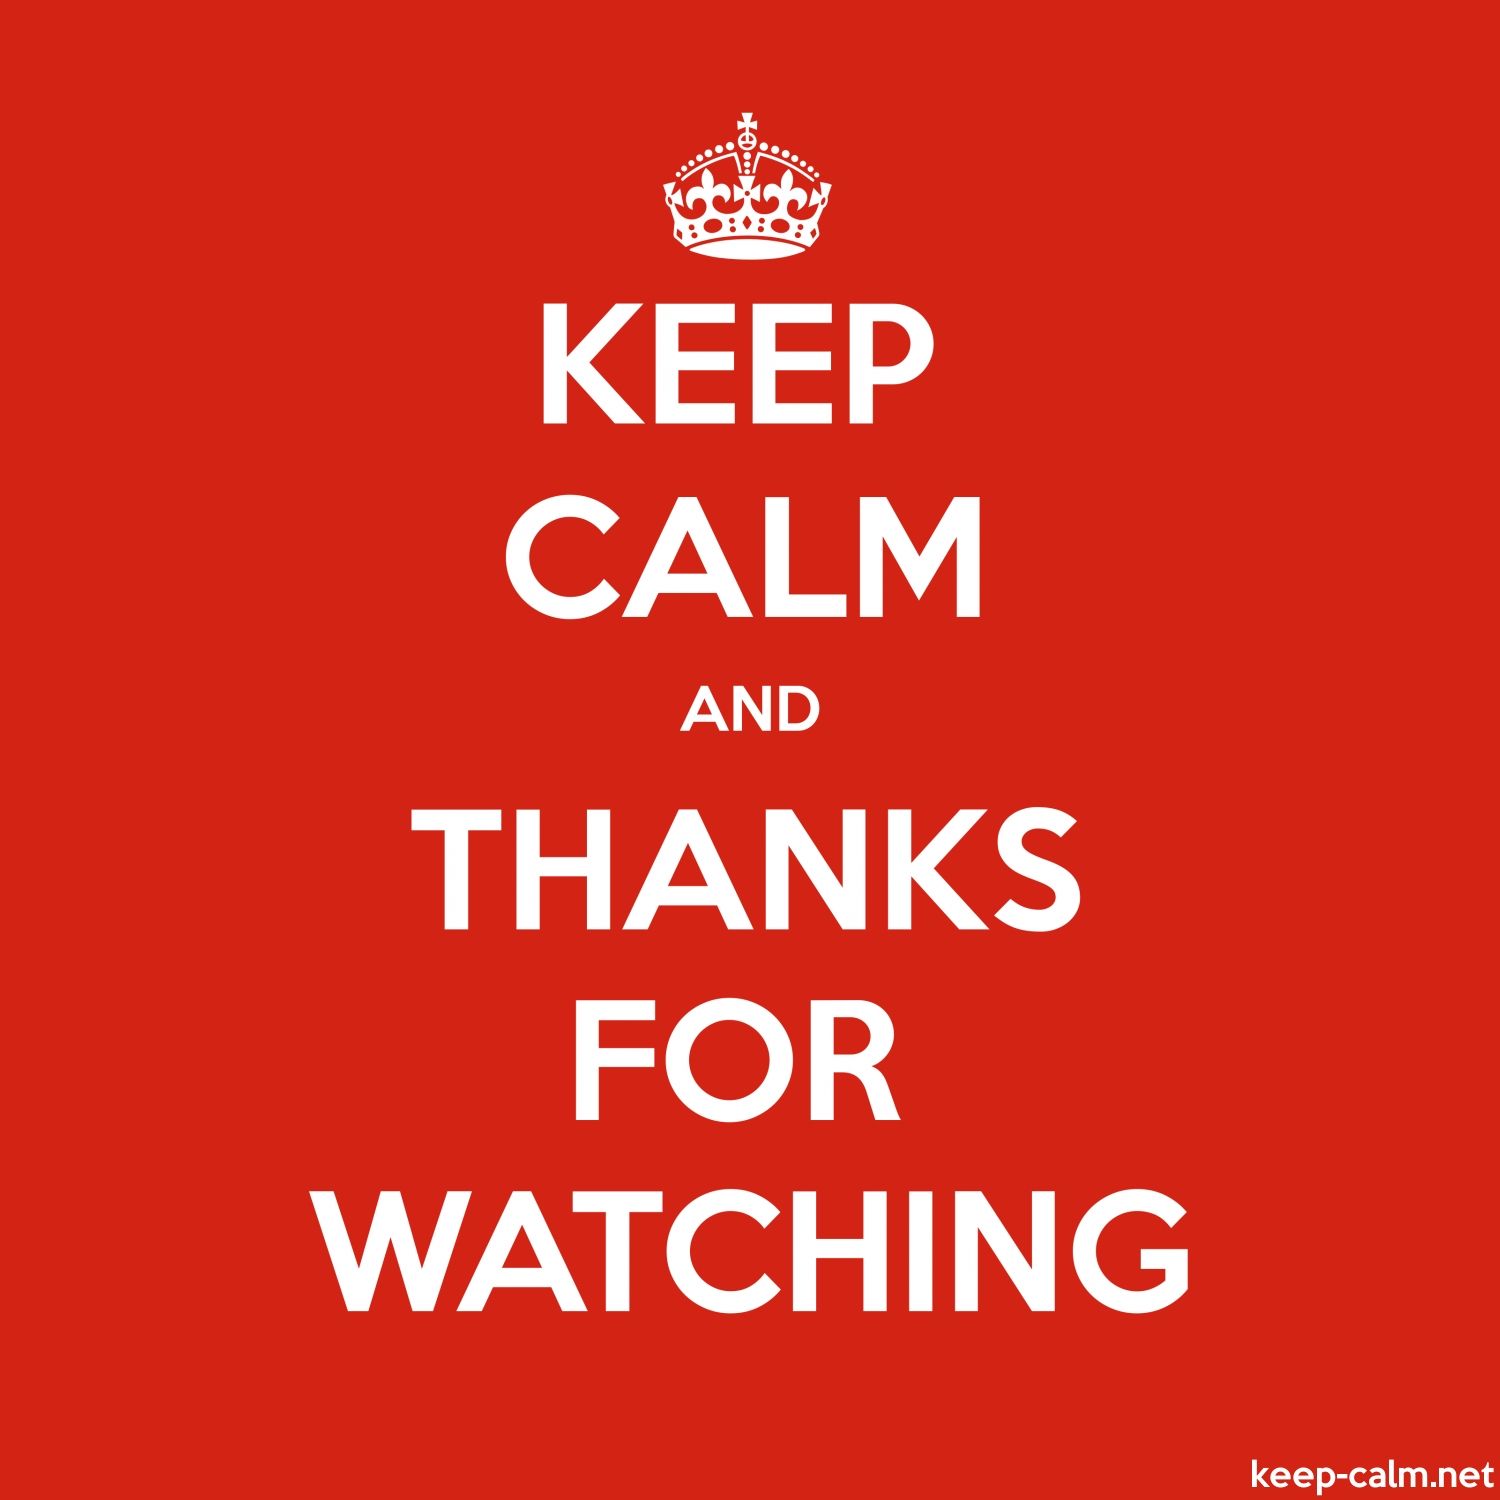 KEEP CALM AND THANKS FOR WATCHING